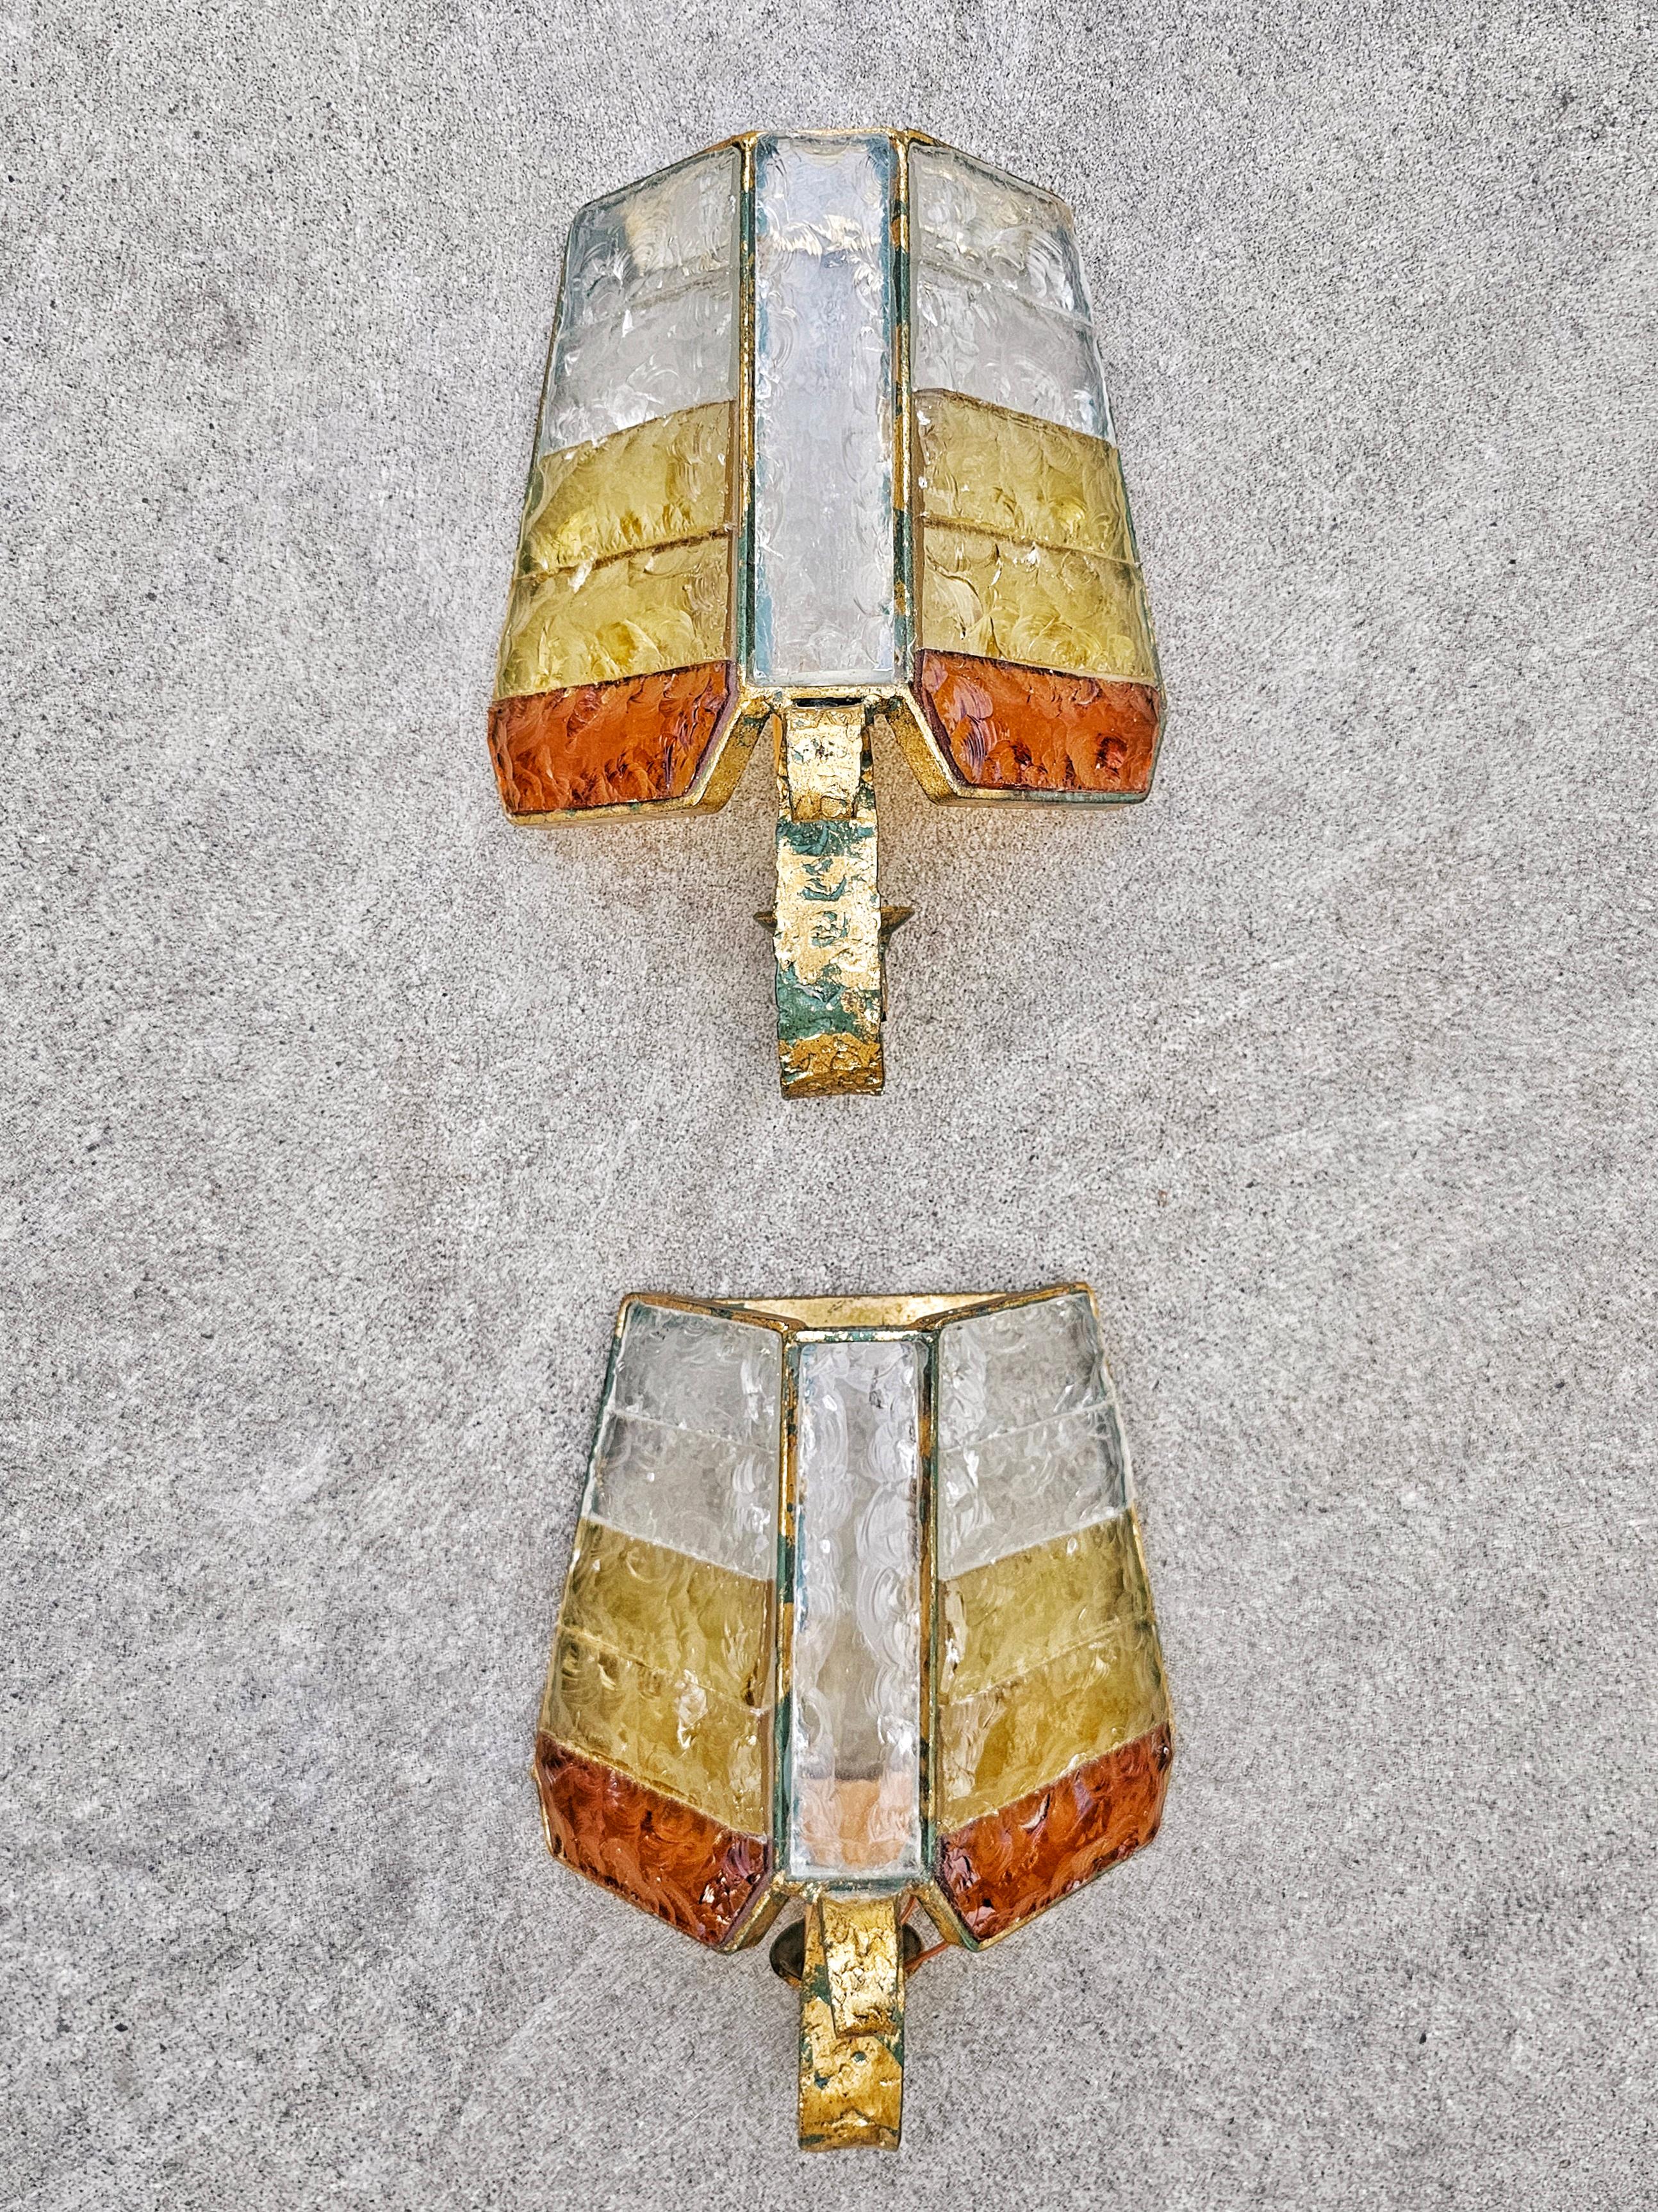 Pair of Brutalist Sconces in hammered glass by Longobard, Italy 1970s For Sale 5